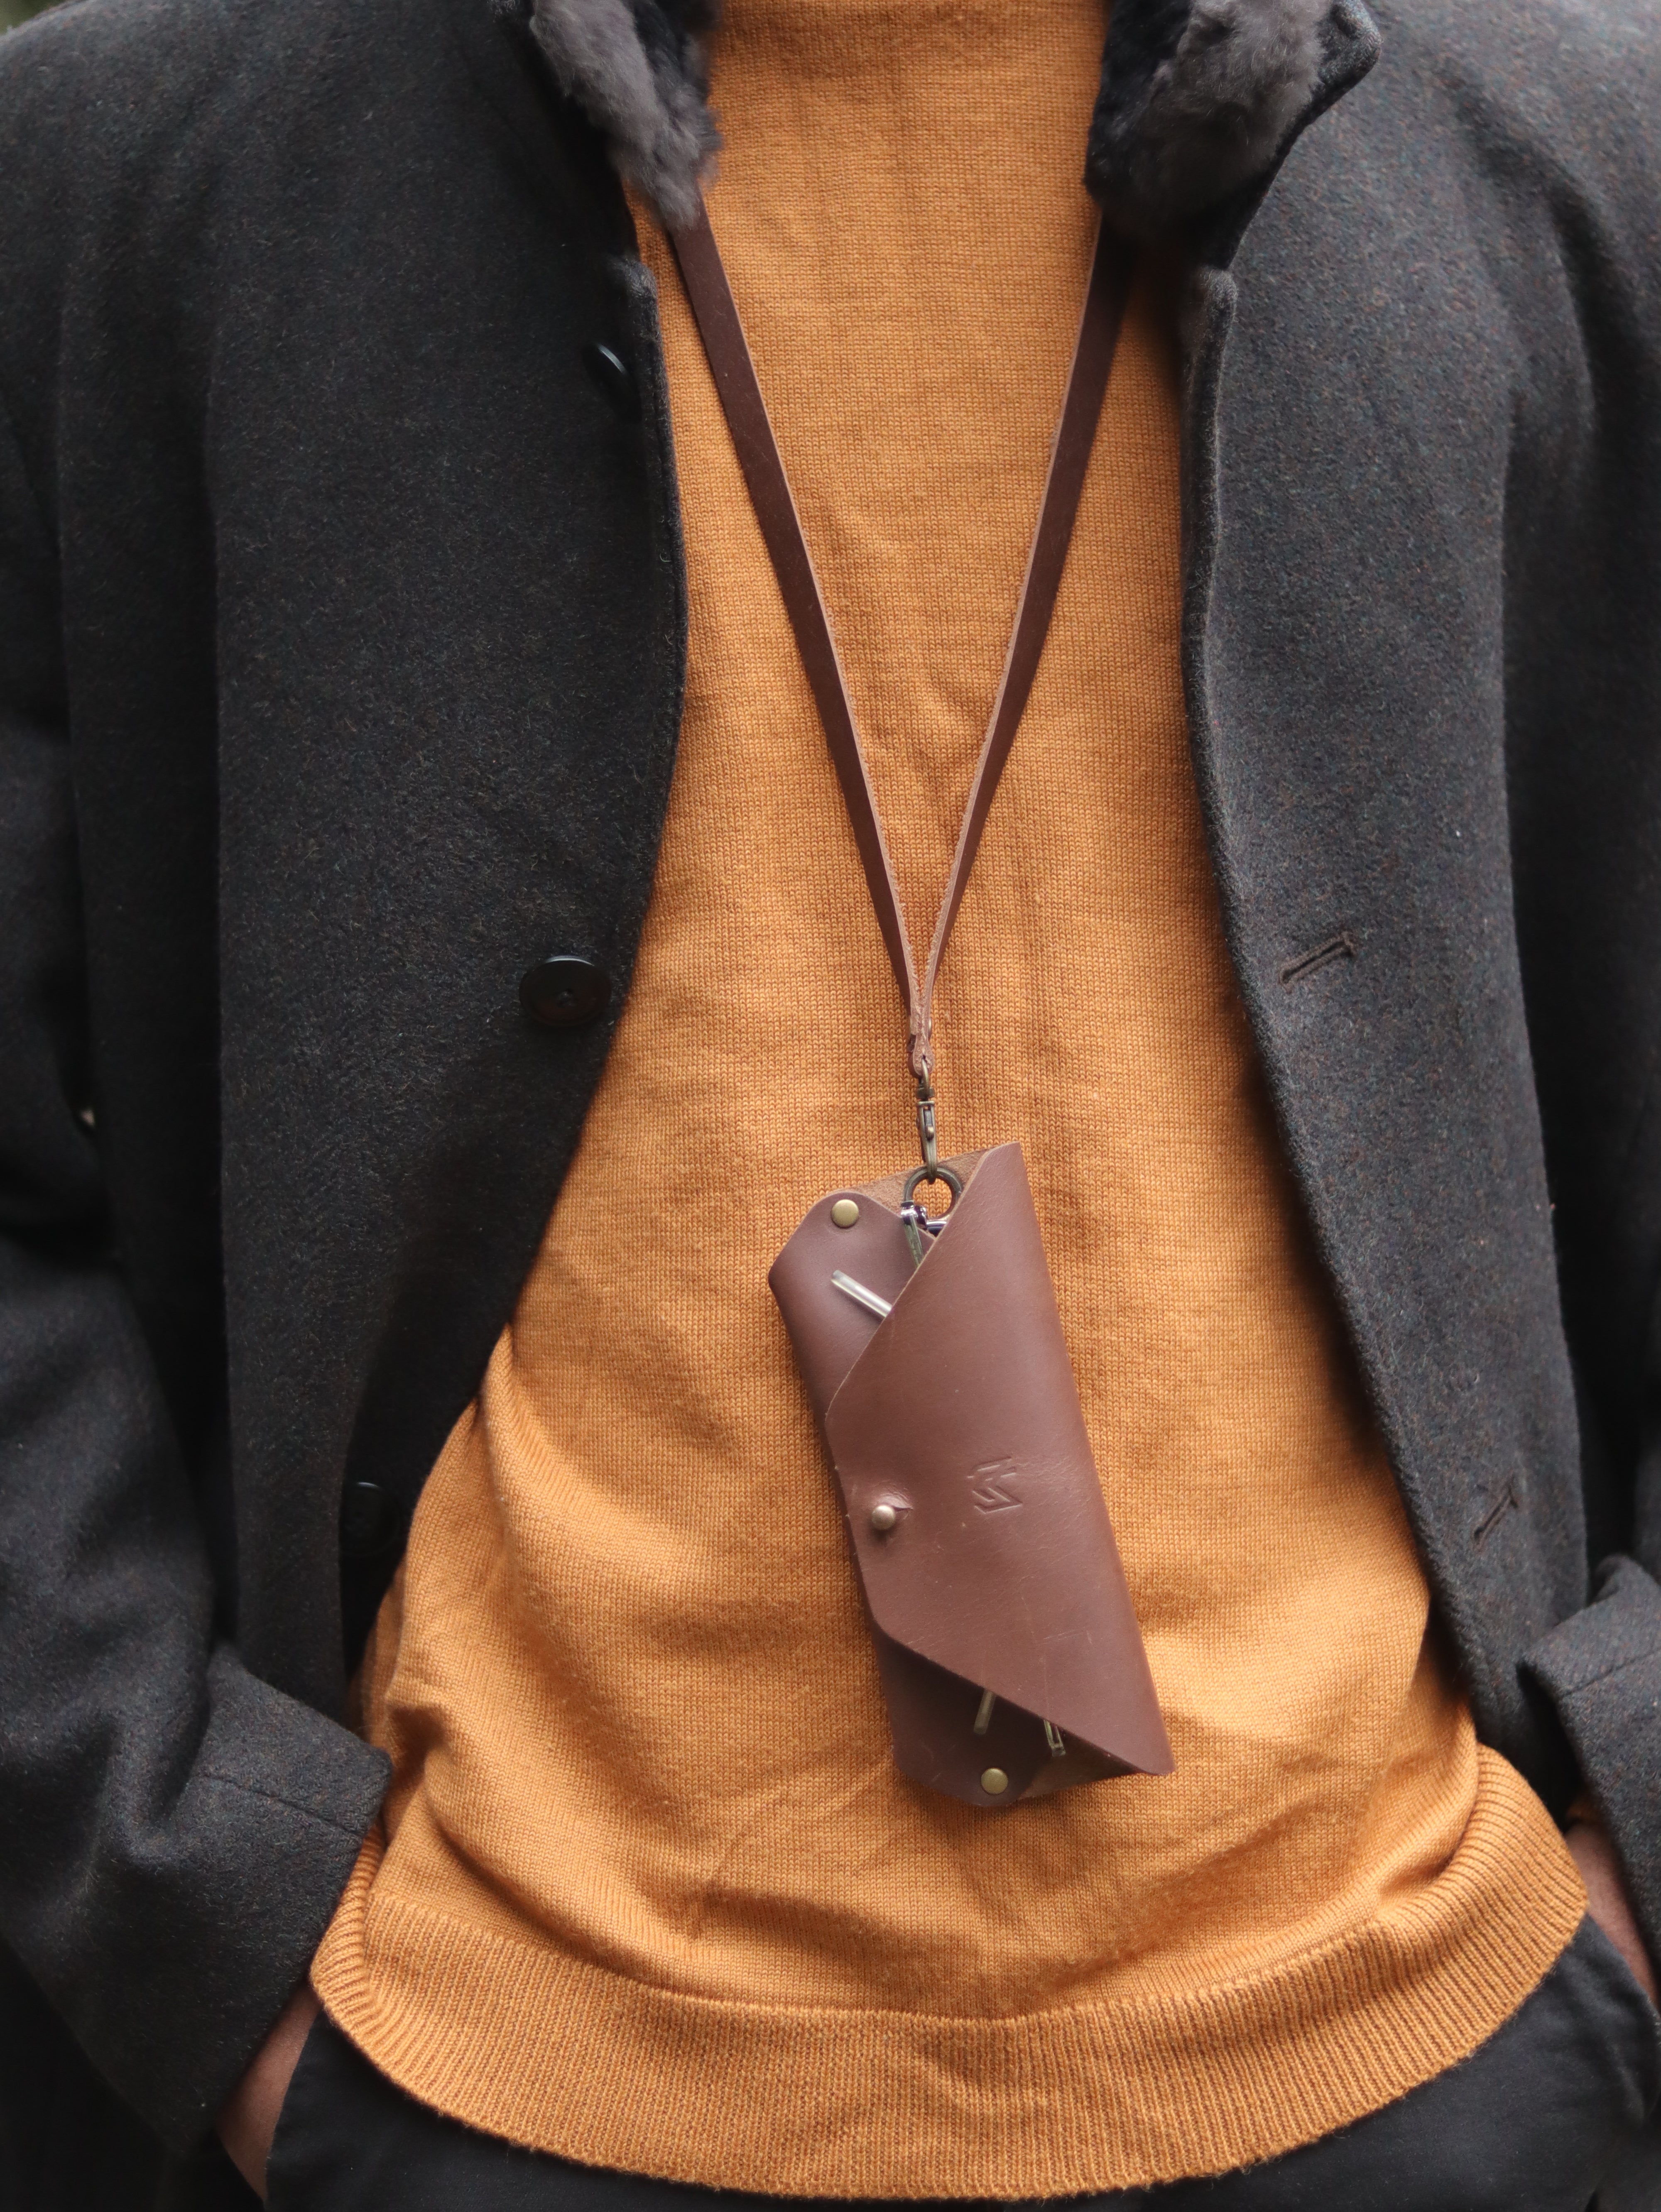 SG-1 SUNGLASSES CASE - ALMOND BROWN LEATHER